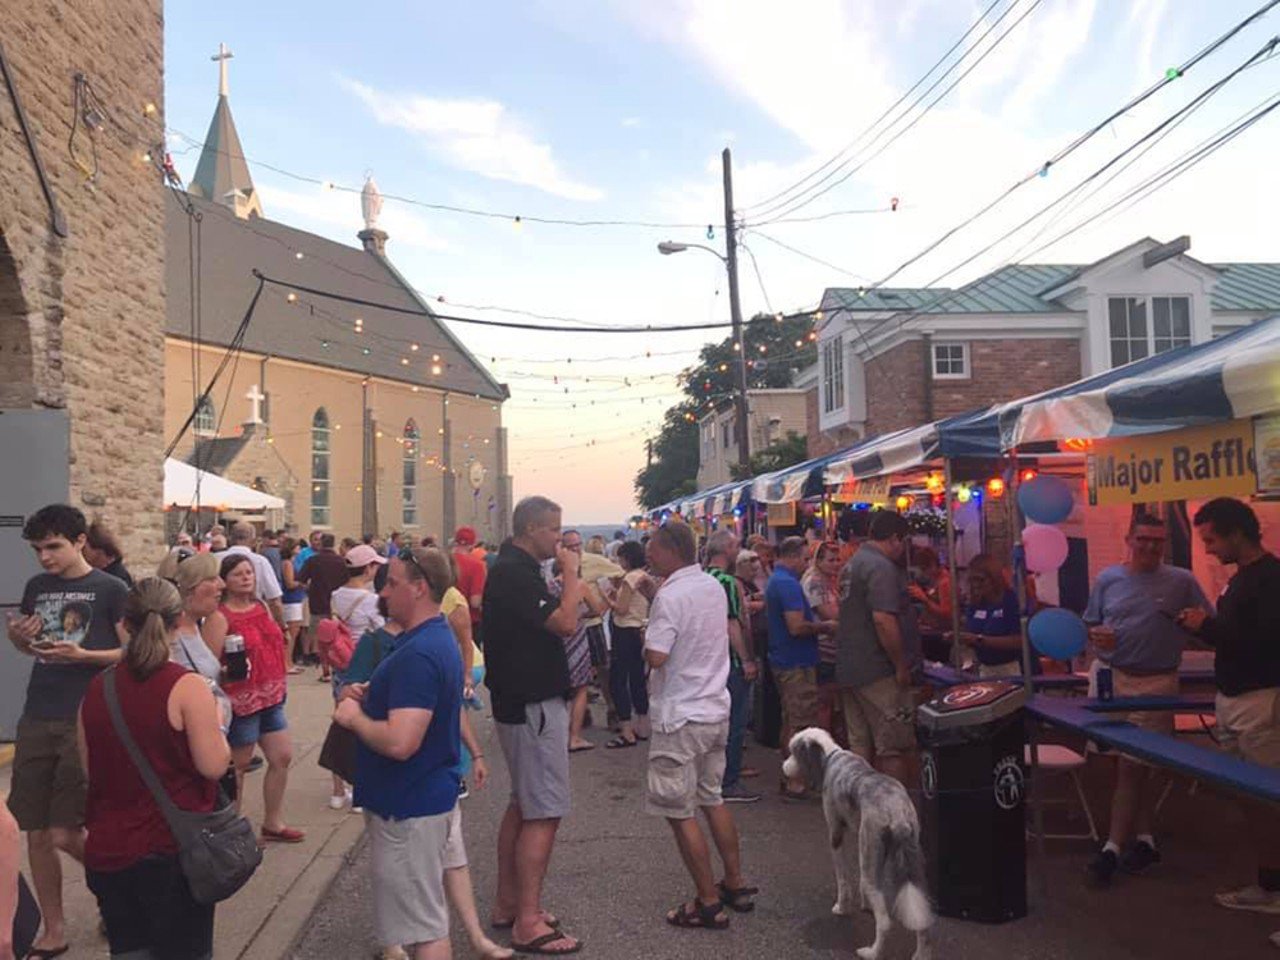 Holy Cross-Immaculata Parish Summer Festival
5-11 p.m. Aug. 4-5
This fun-packed event starts with “Yappy Hour,” a dog-friendly gathering featuring drinks at happy hour prices. Casino games such as Bix Six, Split the Pot, Bars and Bells and other fun games for all ages will be featured each night. A silent auction will also take place, with special themed baskets being raffled off throughout the weekend. The weekend fun will be accompanied by entertainment from Red Hot Riot, Easter Rising and Union Son. Munch on good food and sip on an ice-cold beer, margarita or glass of wine while “breaking bread together” with fellow community members.  
5-11 p.m. Aug. 4-5. Guido Street in Mount Adams, hciparish.org.